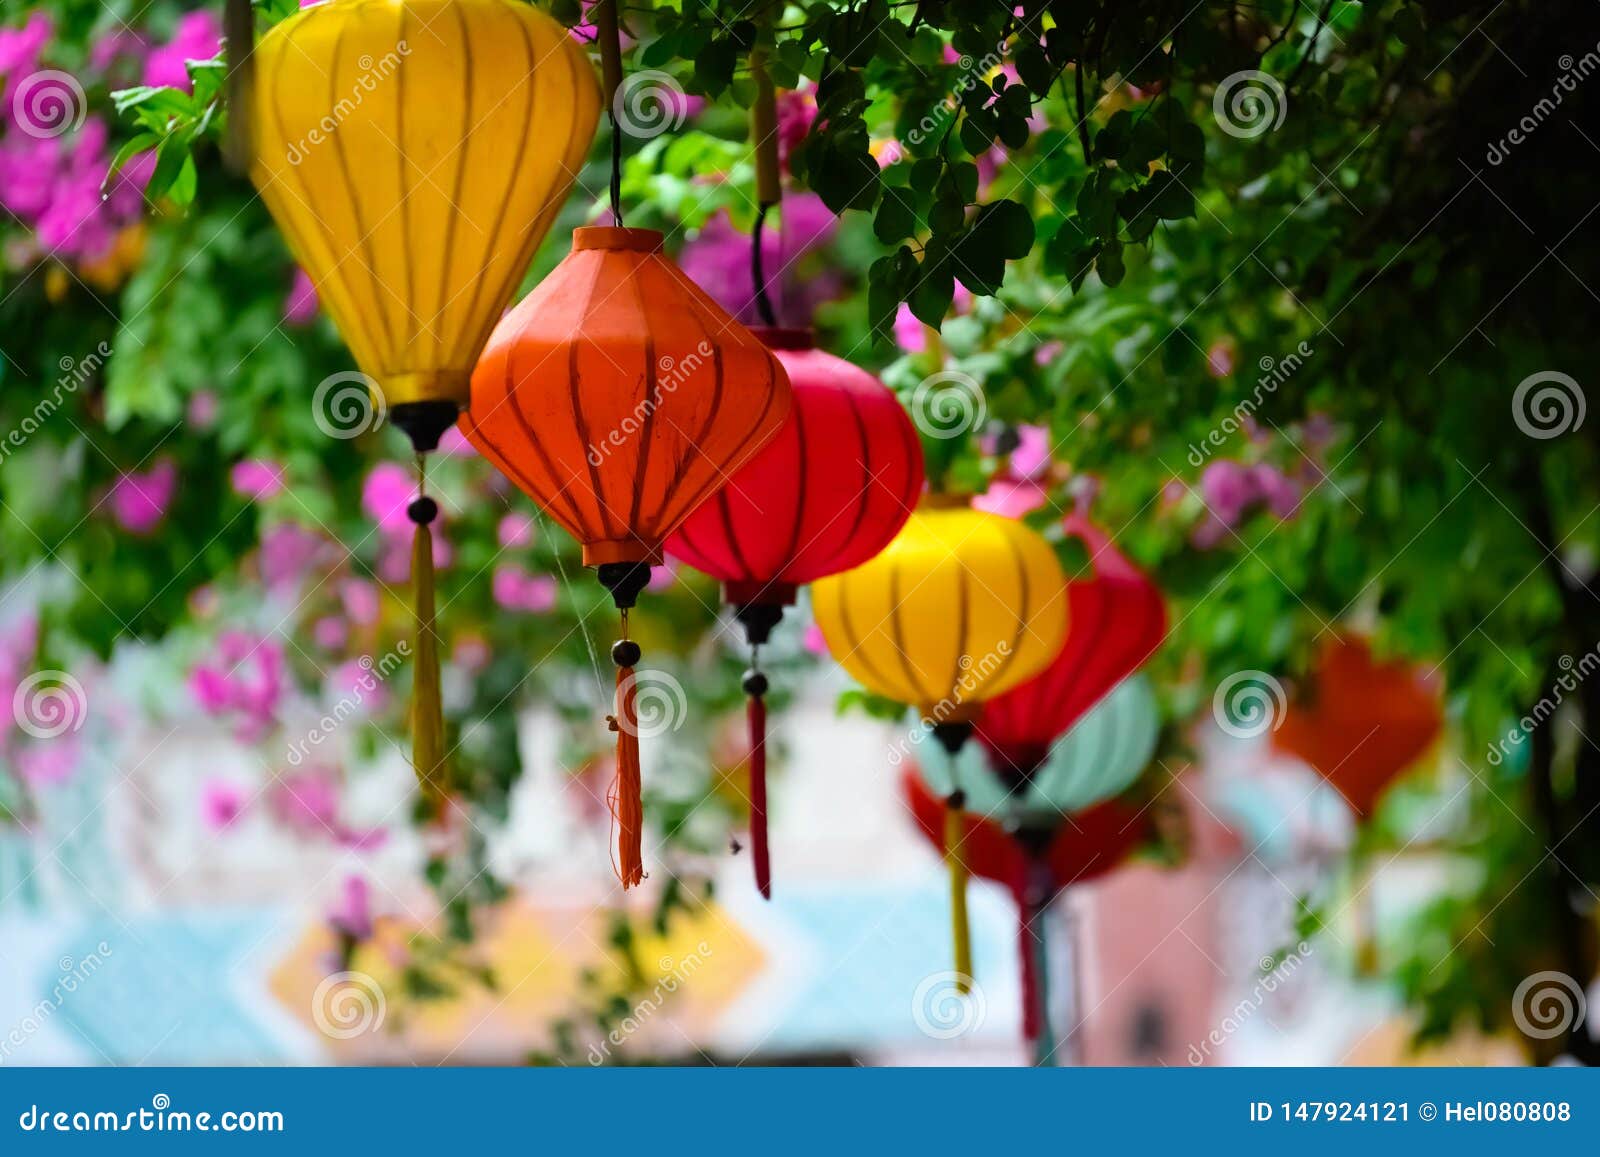 colorful lampions in hoi an, vietnam, street decorated with chinese lanterns